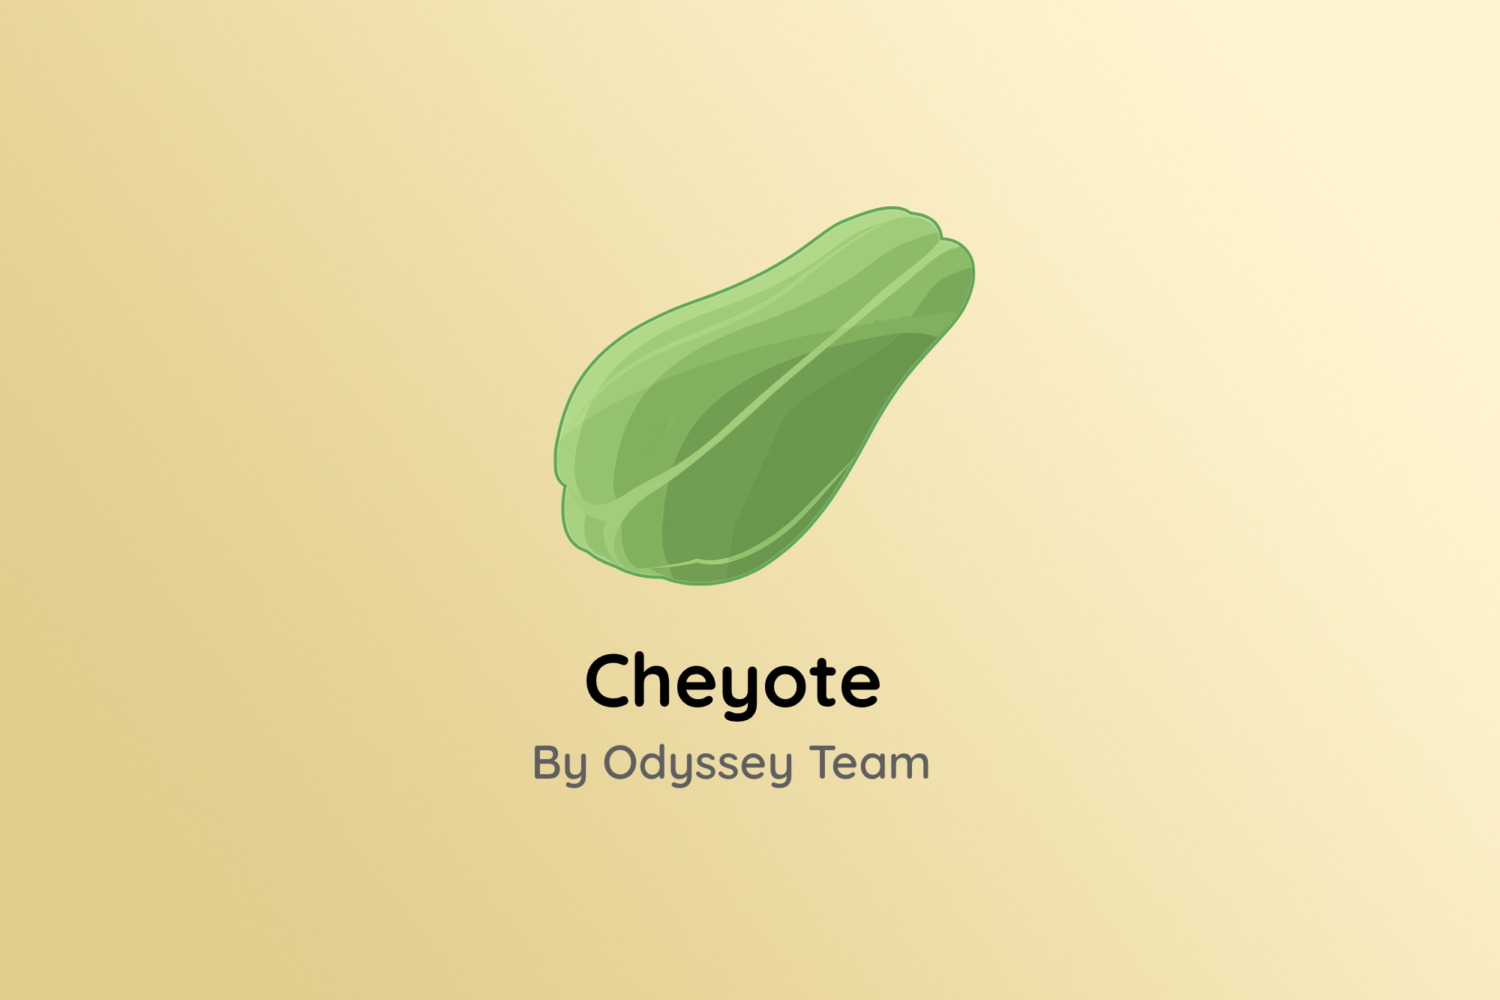 The Cheyote jailbreak for iOS 15.0-15.1.1 by the Odyssey Team.